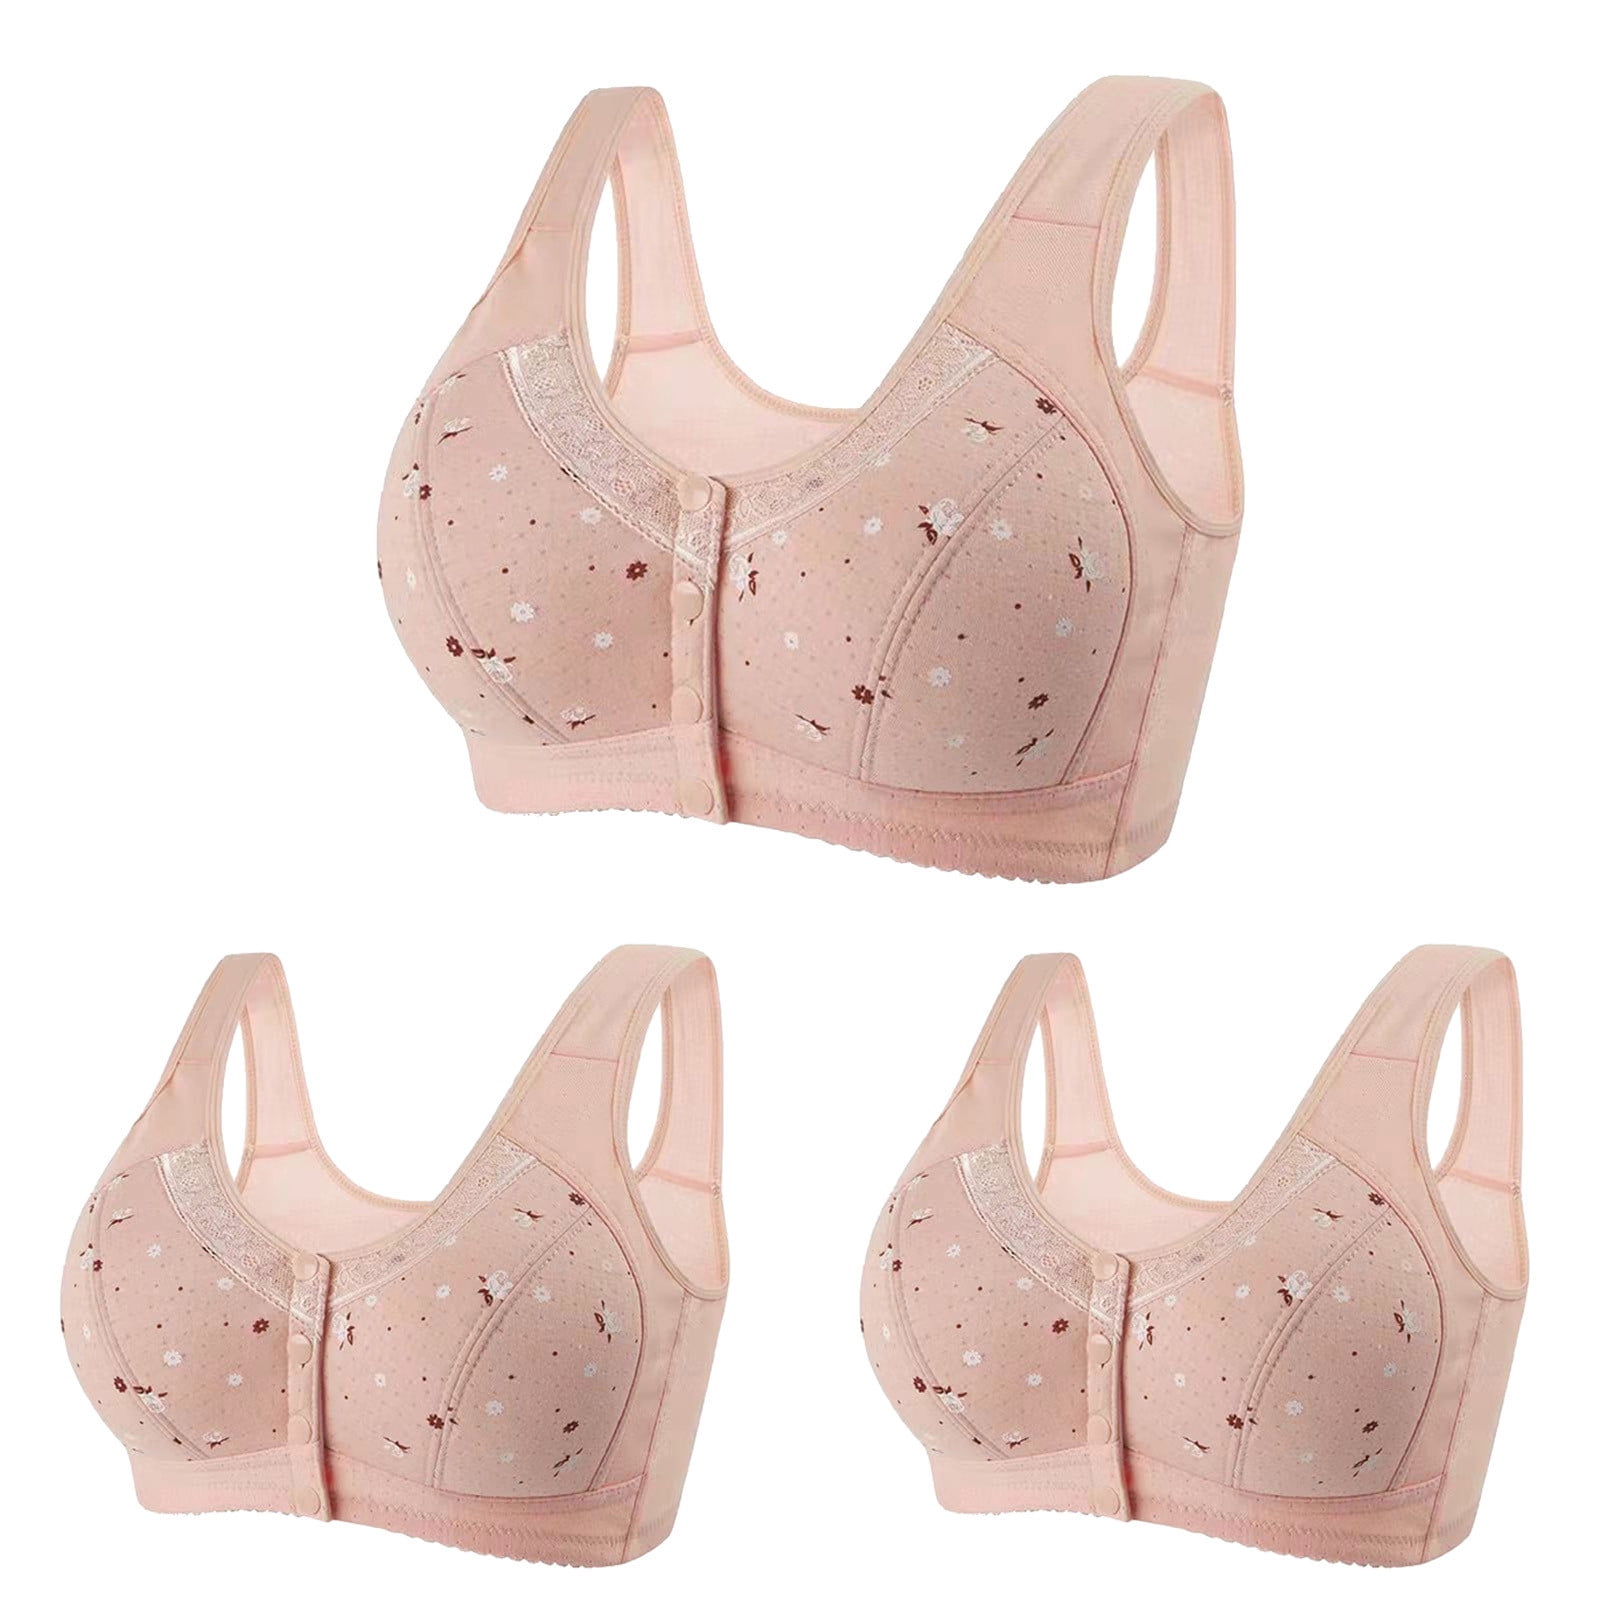 liucocotos Katycharm Bras, Daisy Bra for Older Women, Lisa Charm Bras for  Seniors Front Closure No Underwire Bras (Small,Back) at  Women's  Clothing store